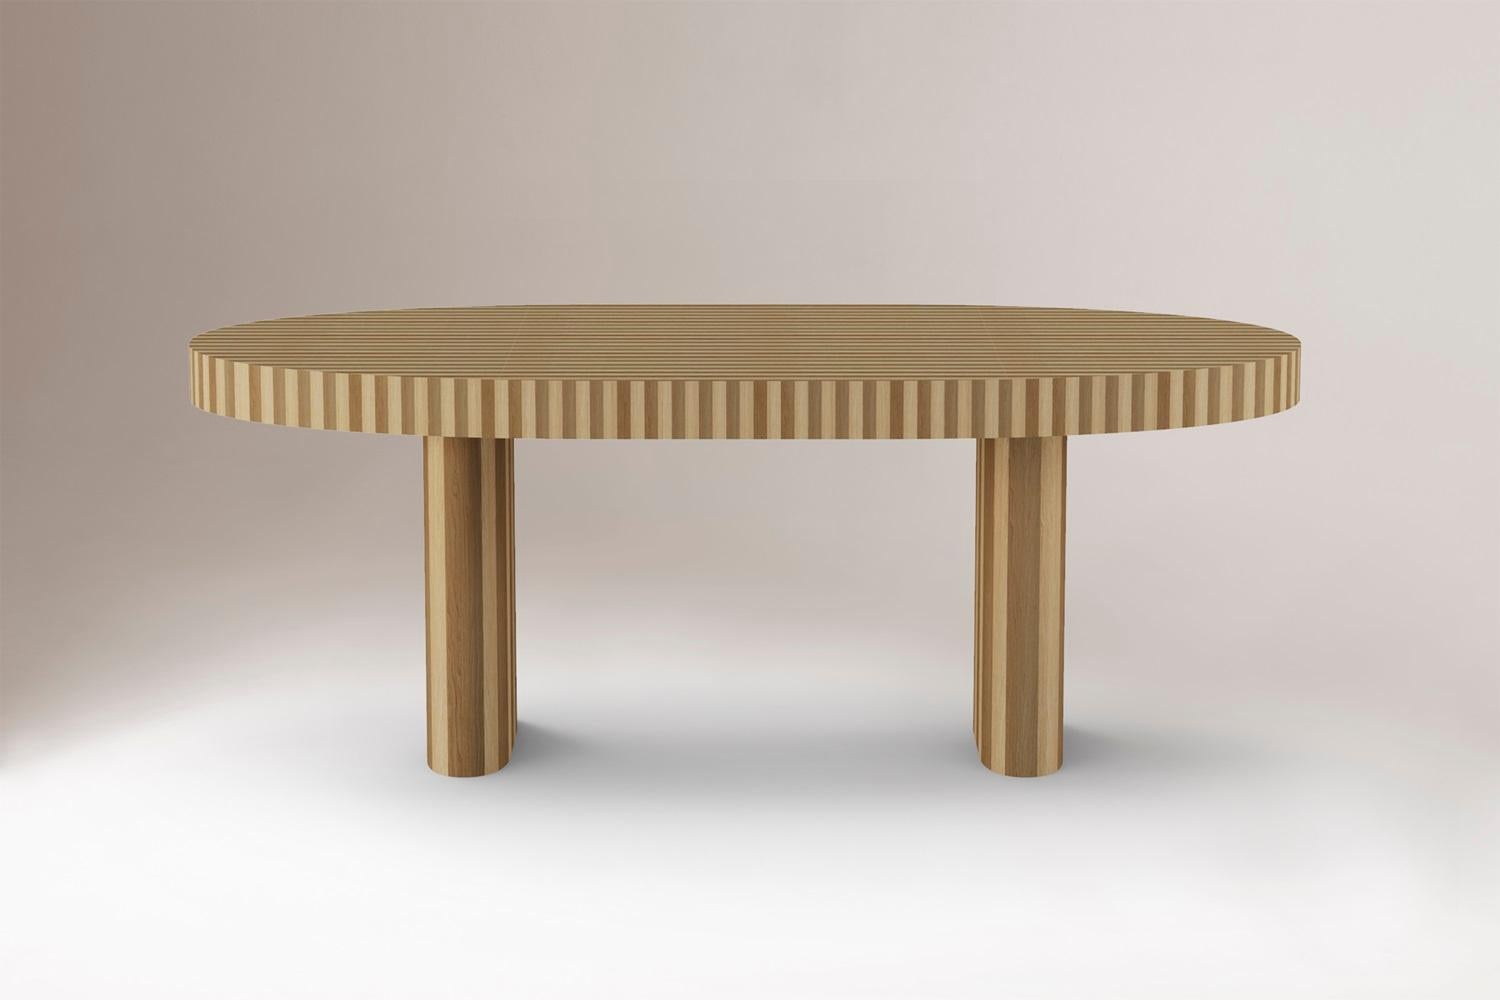 Nusa Oval Dining Table Organic Modern in Natural Wood Marquetery is our latest Dinner table collection, where Southeast Asian inspiration meets modern craftsmanship. Each table intricately weaves an ancient marqueterie technique, seamlessly blending